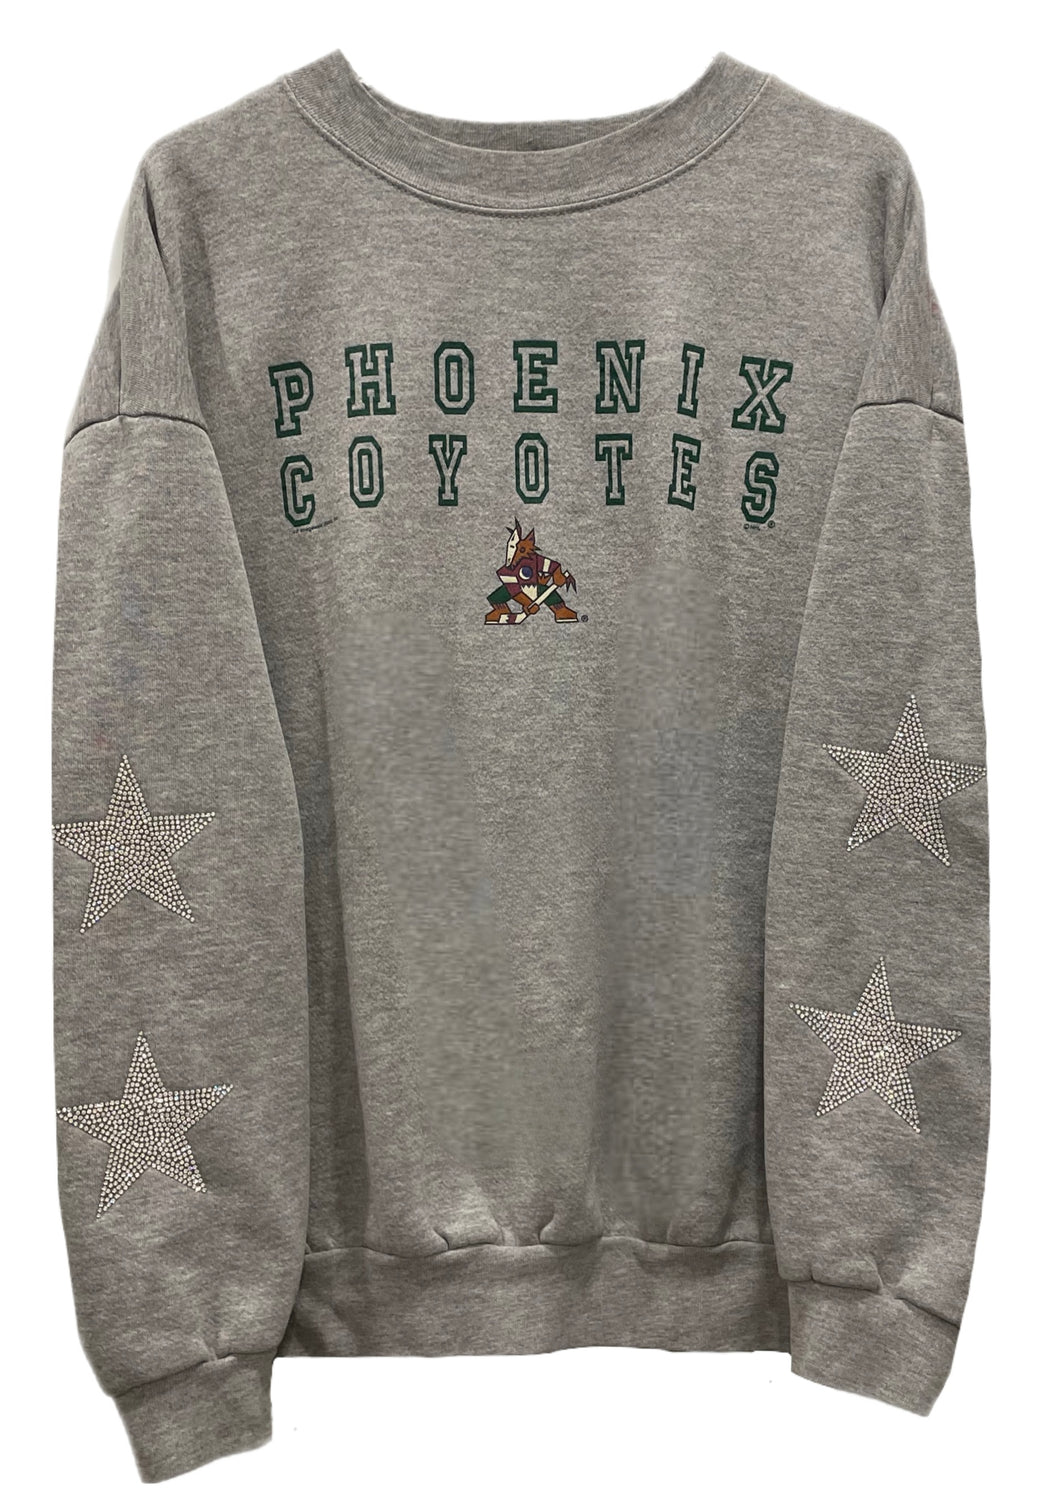 Phoenix Coyotes, NHL “Rare Find” One of a KIND Vintage Sweatshirt with Crystal Star Design